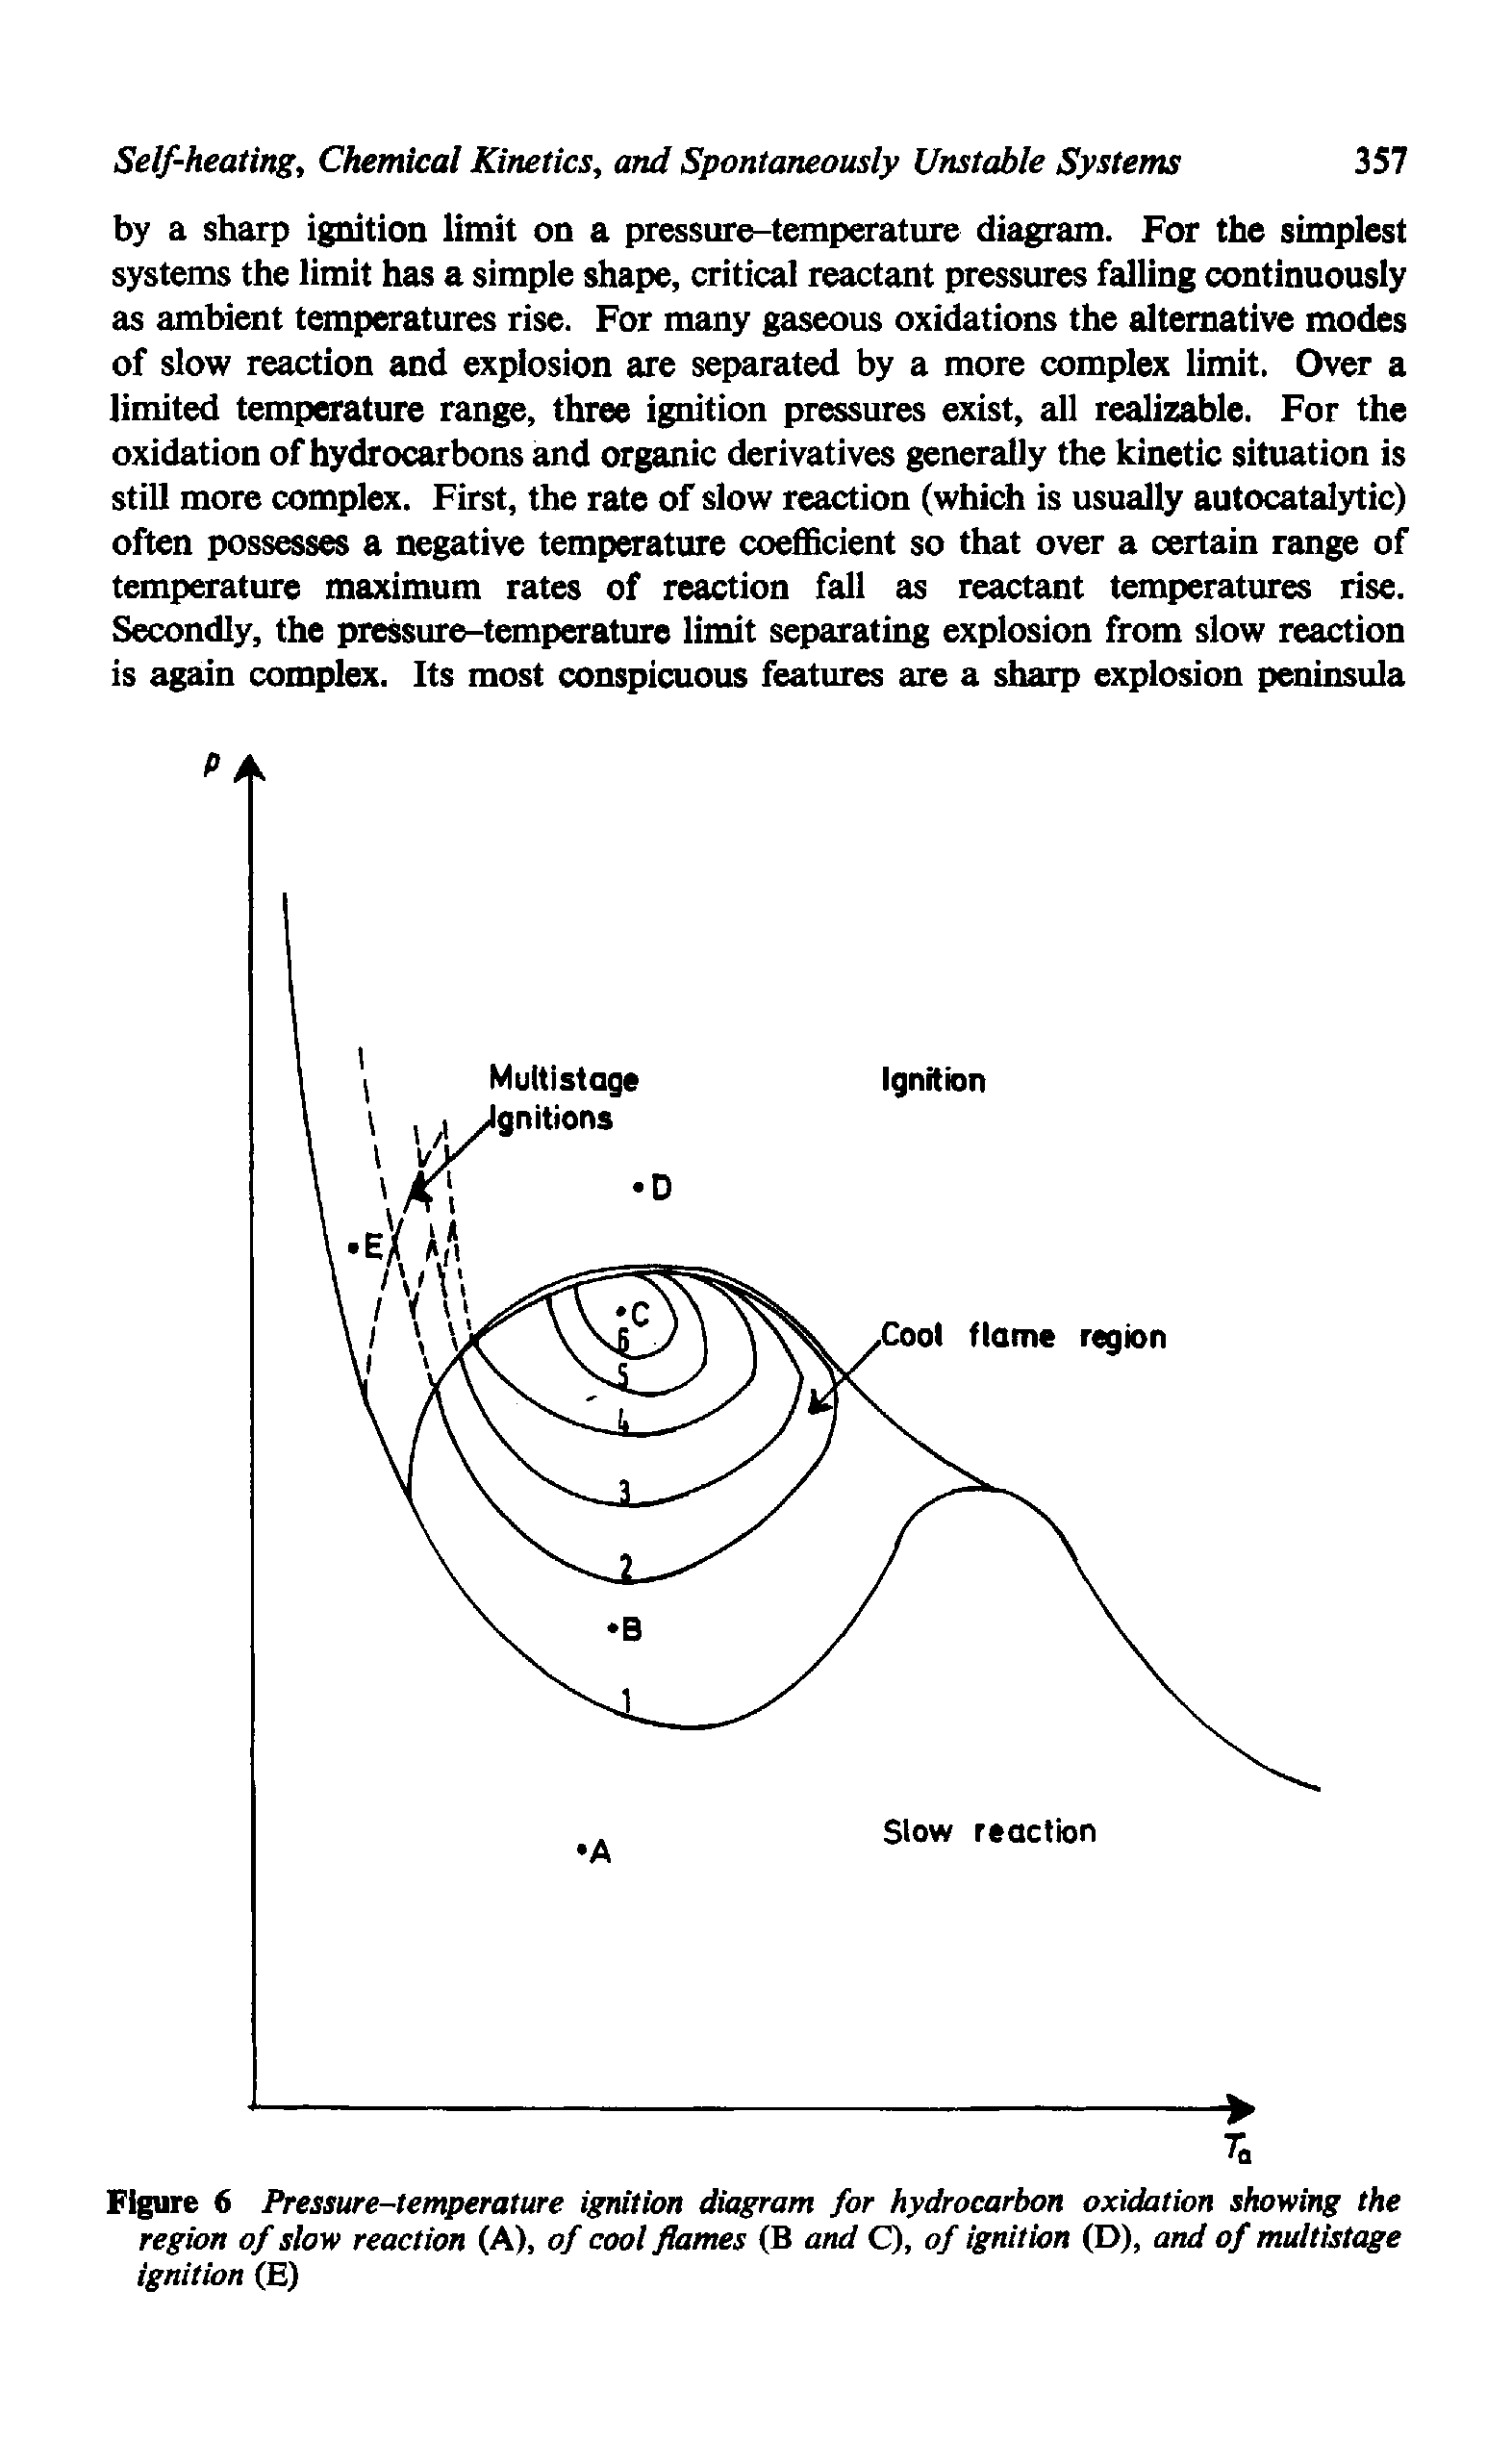 Figure 6 Pressure-temperature ignition diagram for hydrocarbon oxidation showing the region of slow reaction (A), of cool flames (B and C), of ignition (D), and of multistage ignition (E)...